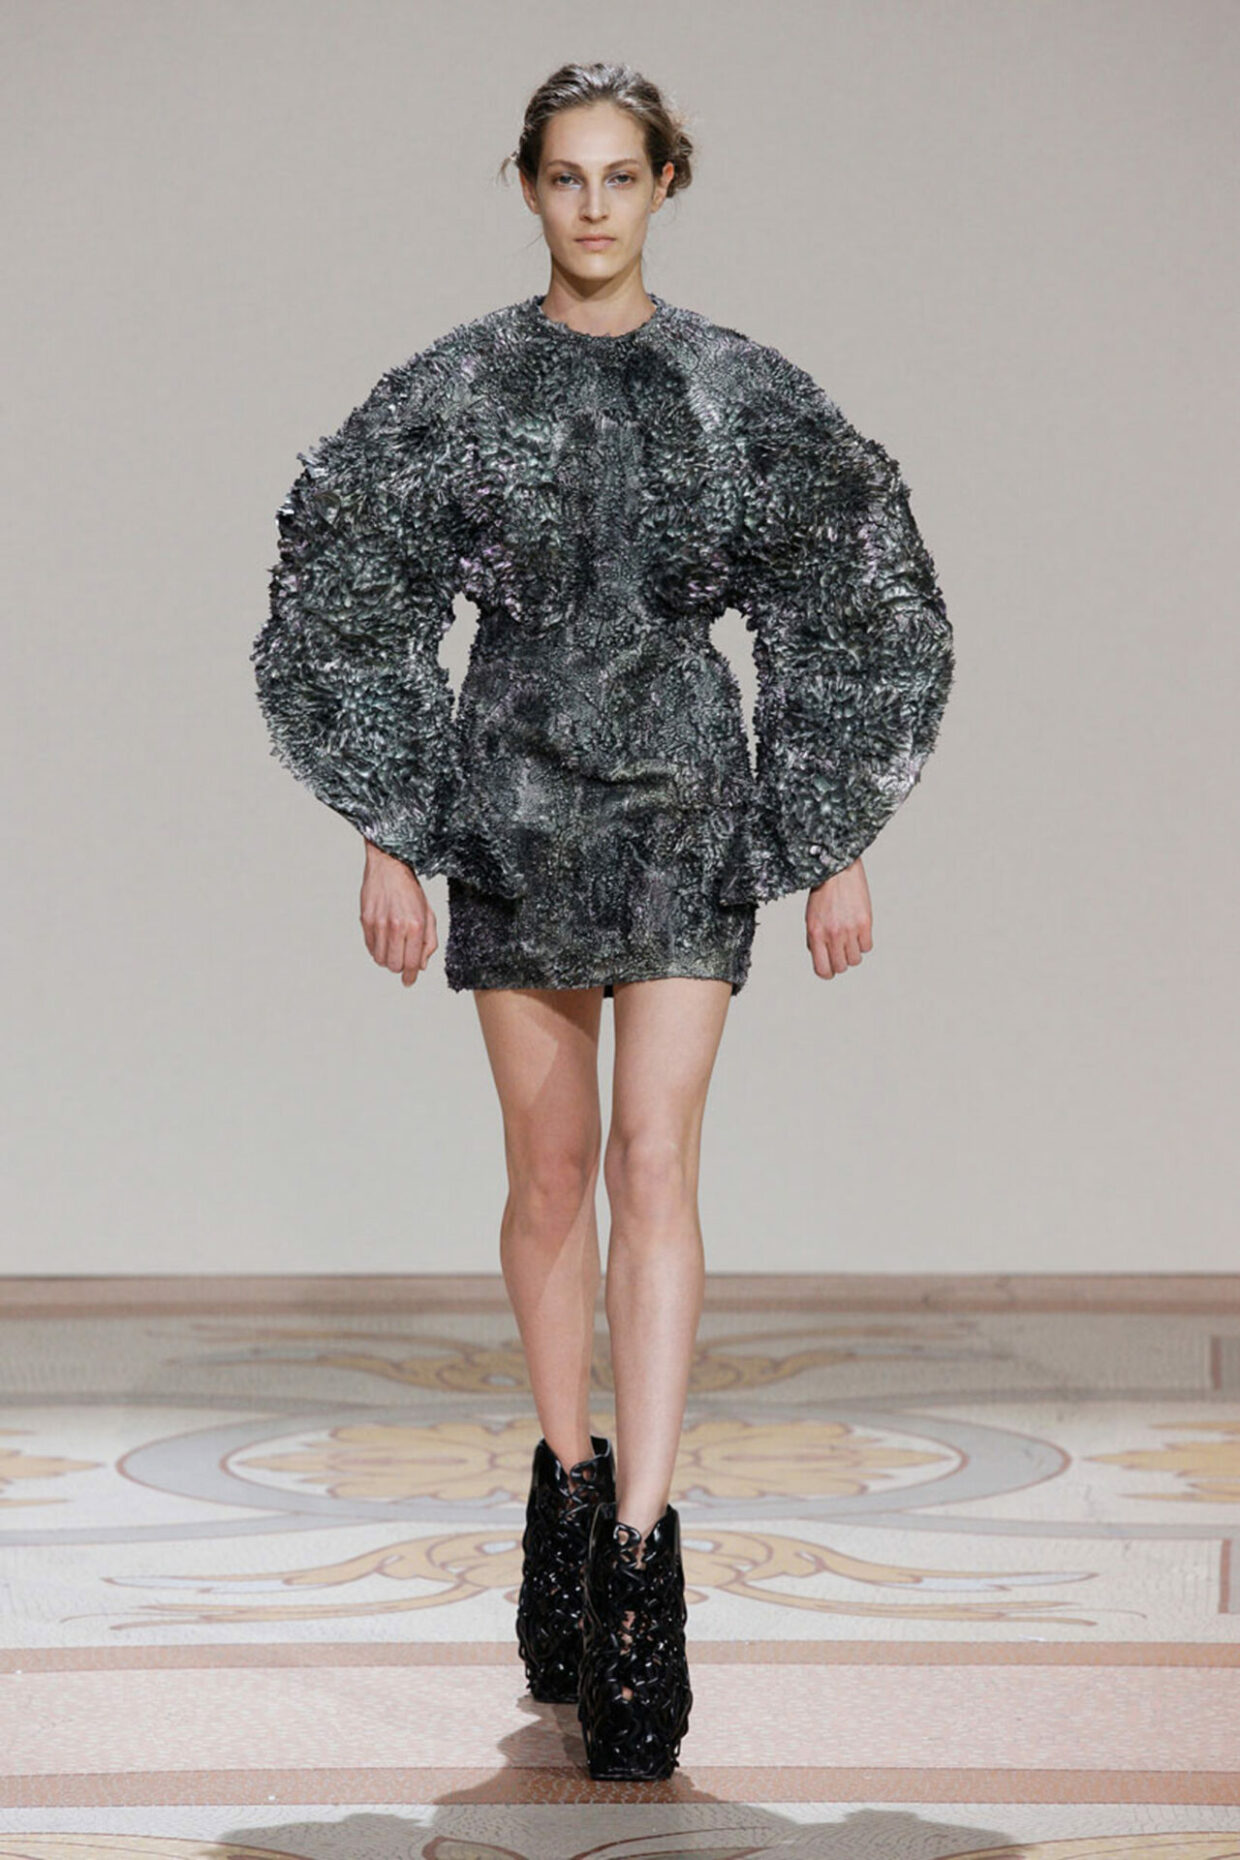 “Couture is actually a really strong platform for developing new techniques” says Iris van Herpen | 4